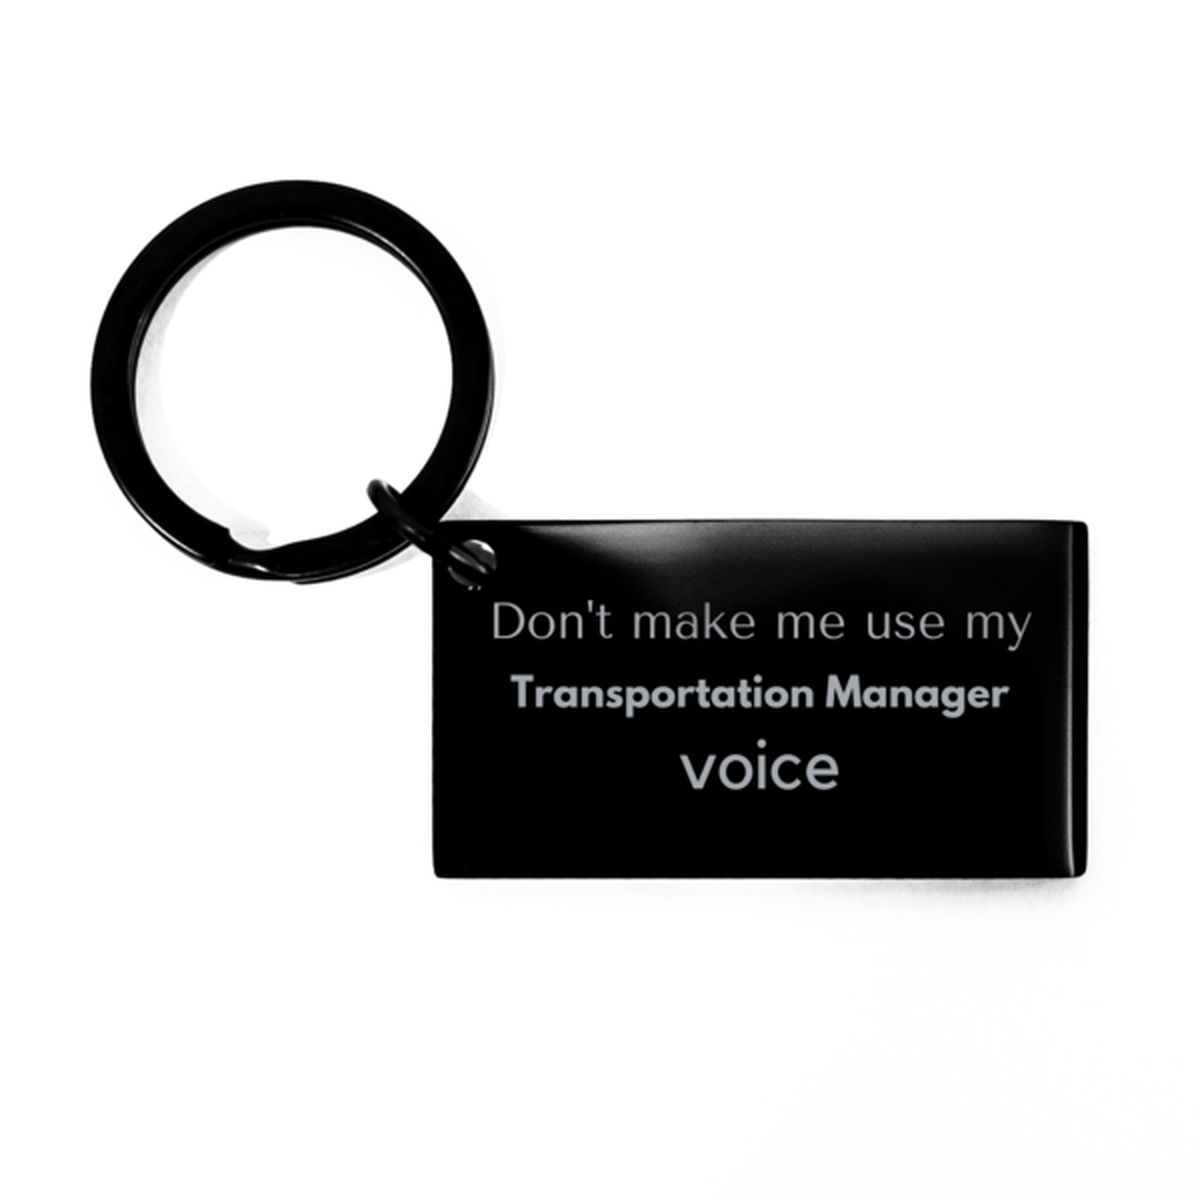 Don't make me use my Transportation Manager voice, Sarcasm Transportation Manager Gifts, Christmas Transportation Manager Keychain Birthday Unique Gifts For Transportation Manager Coworkers, Men, Women, Colleague, Friends